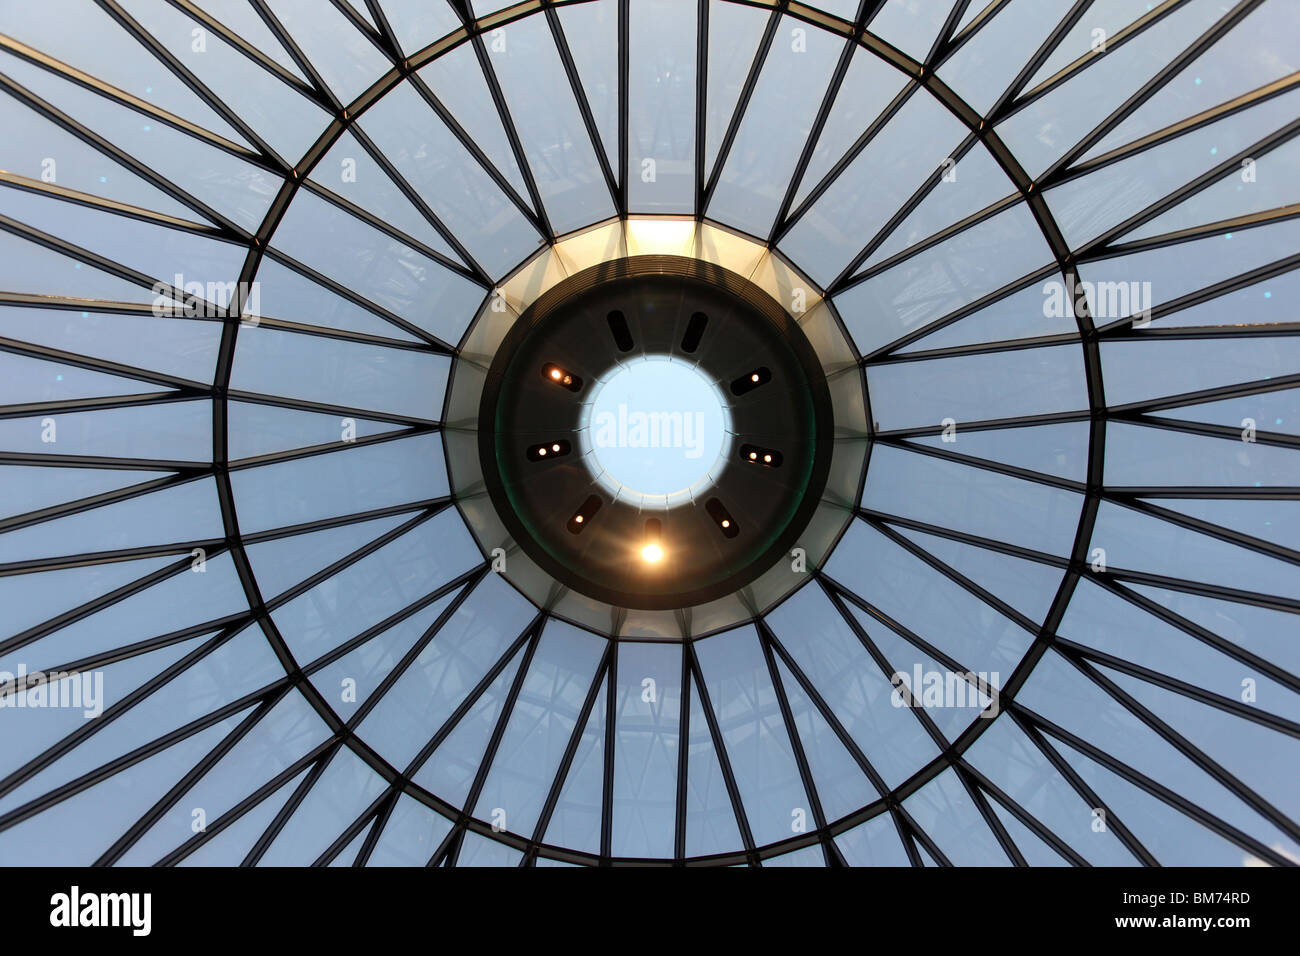 The inside of the top of the Gherkin skyscraper in the city of London, U.K. Stock Photo